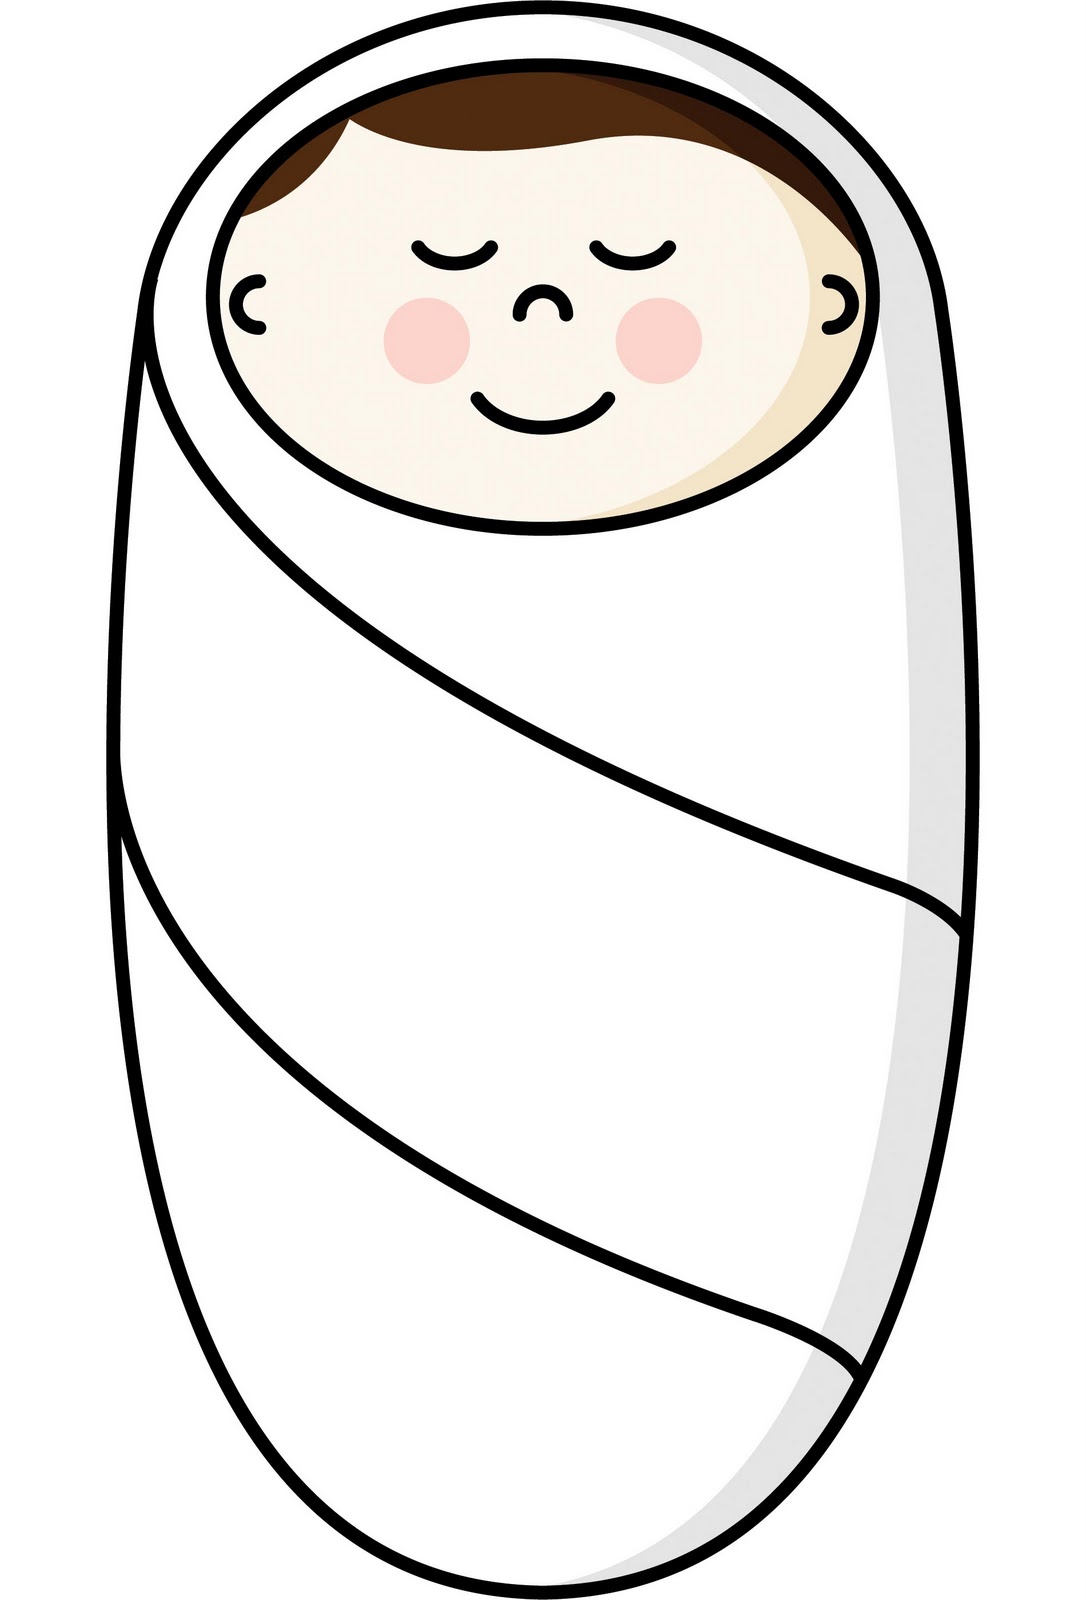 Baby wrapped in blanket clipart.